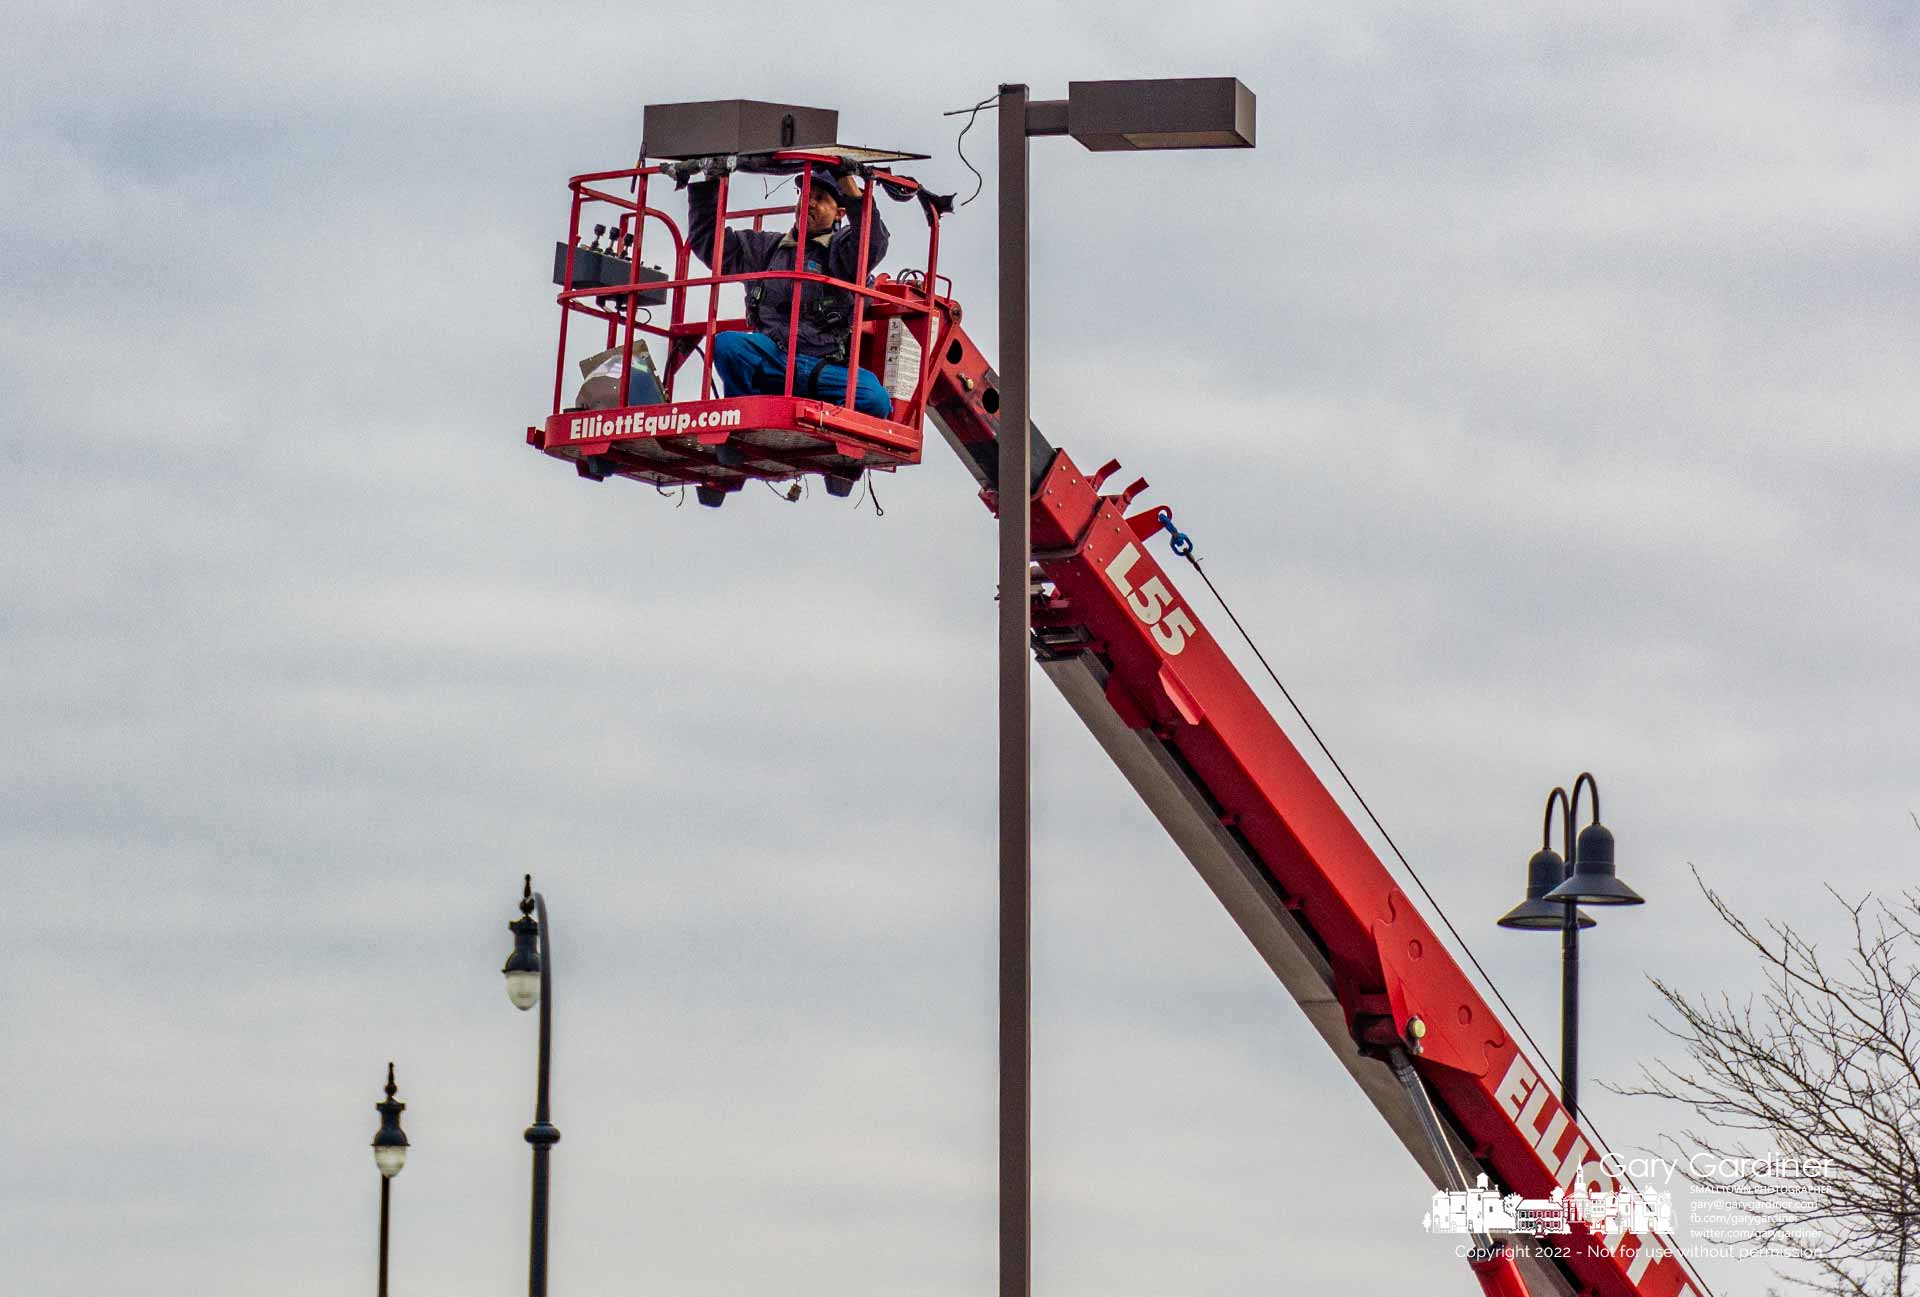 An electrician removes a sodium vapor light fixture at the Westerville Center shopping center to replace it with new LED fixtures. My Final Photo for November 29, 2022. 